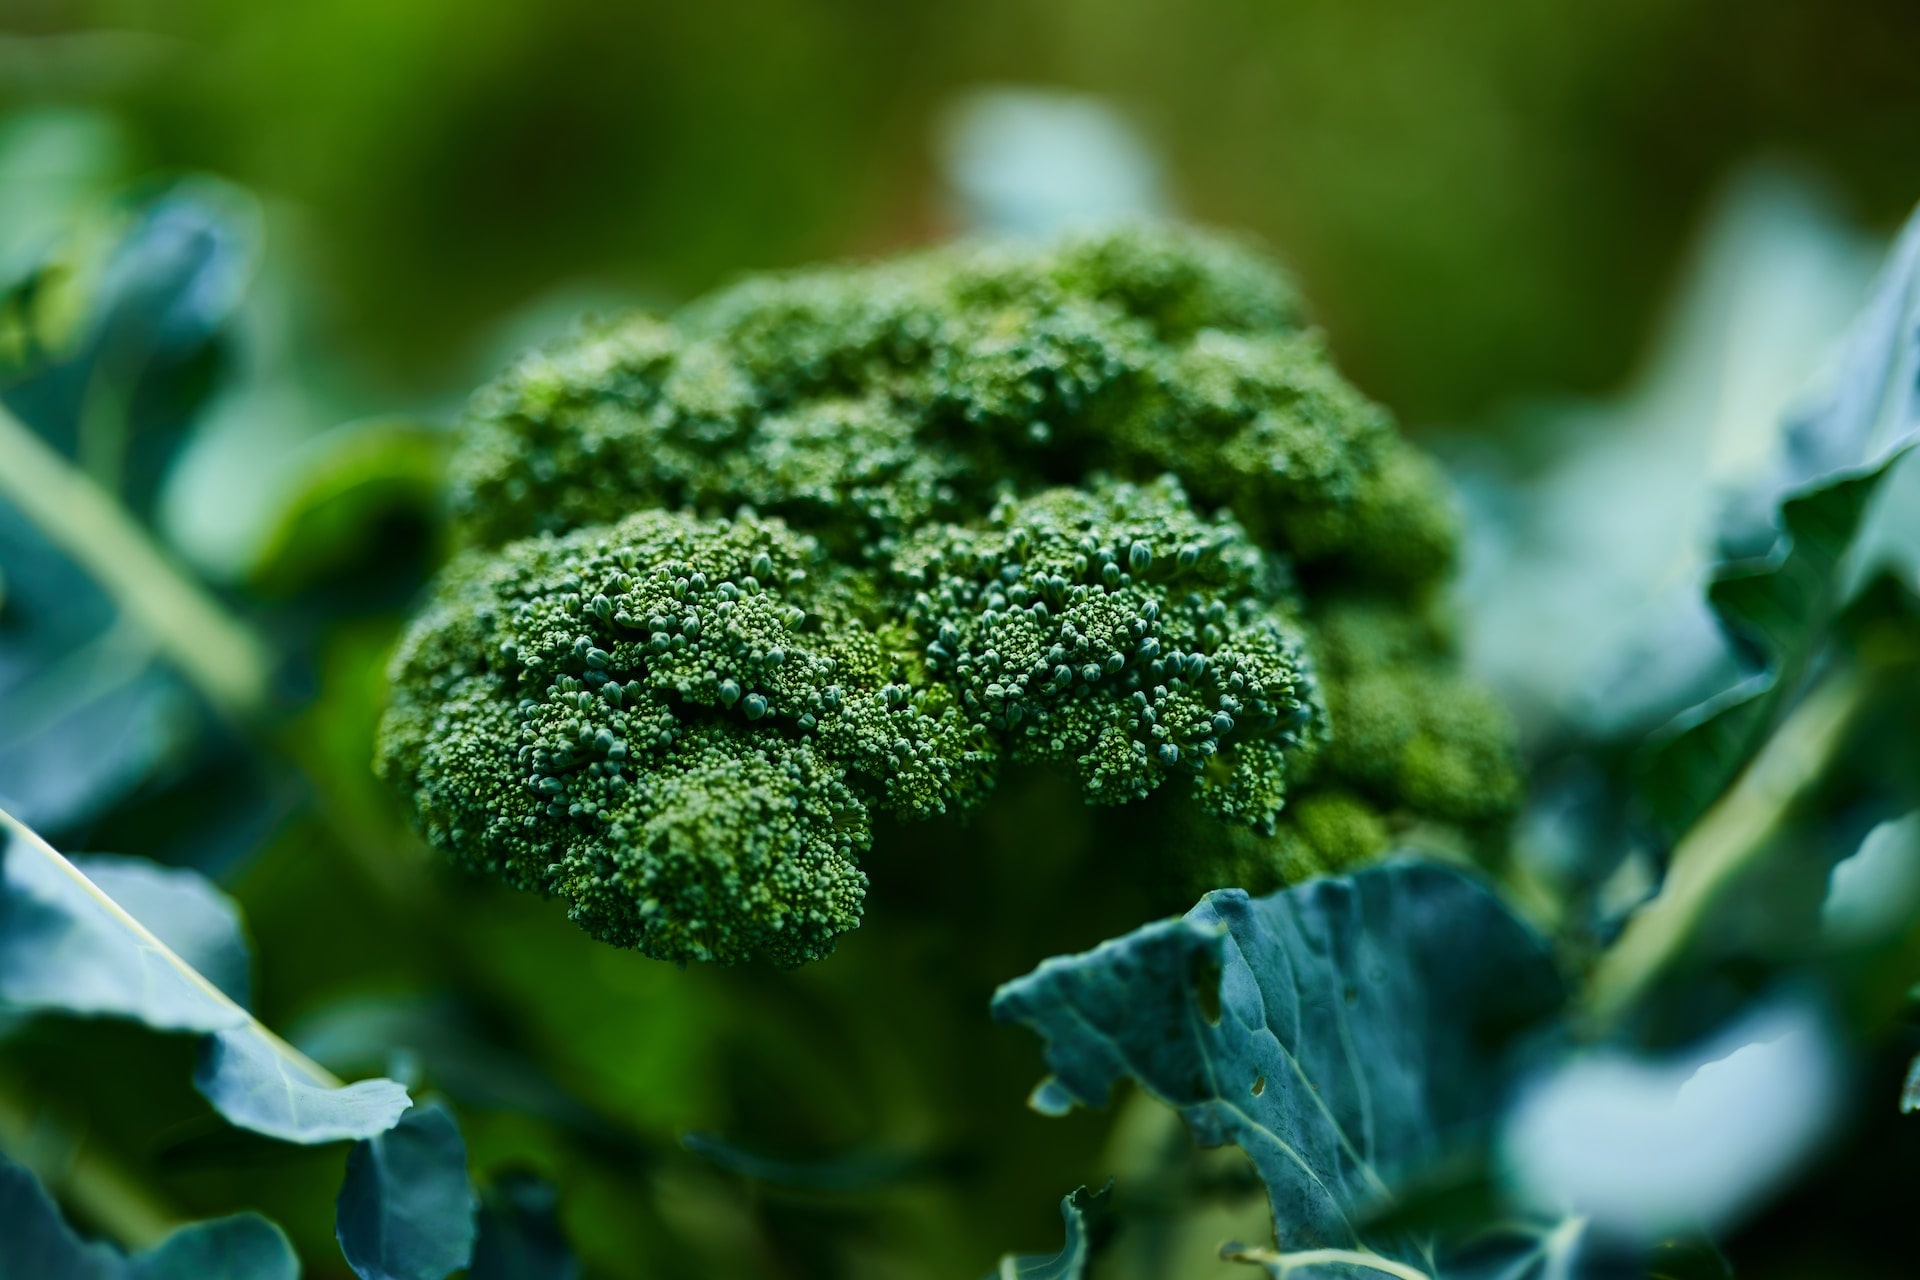 Top 6 Winter Vegetables to Boost Your Health